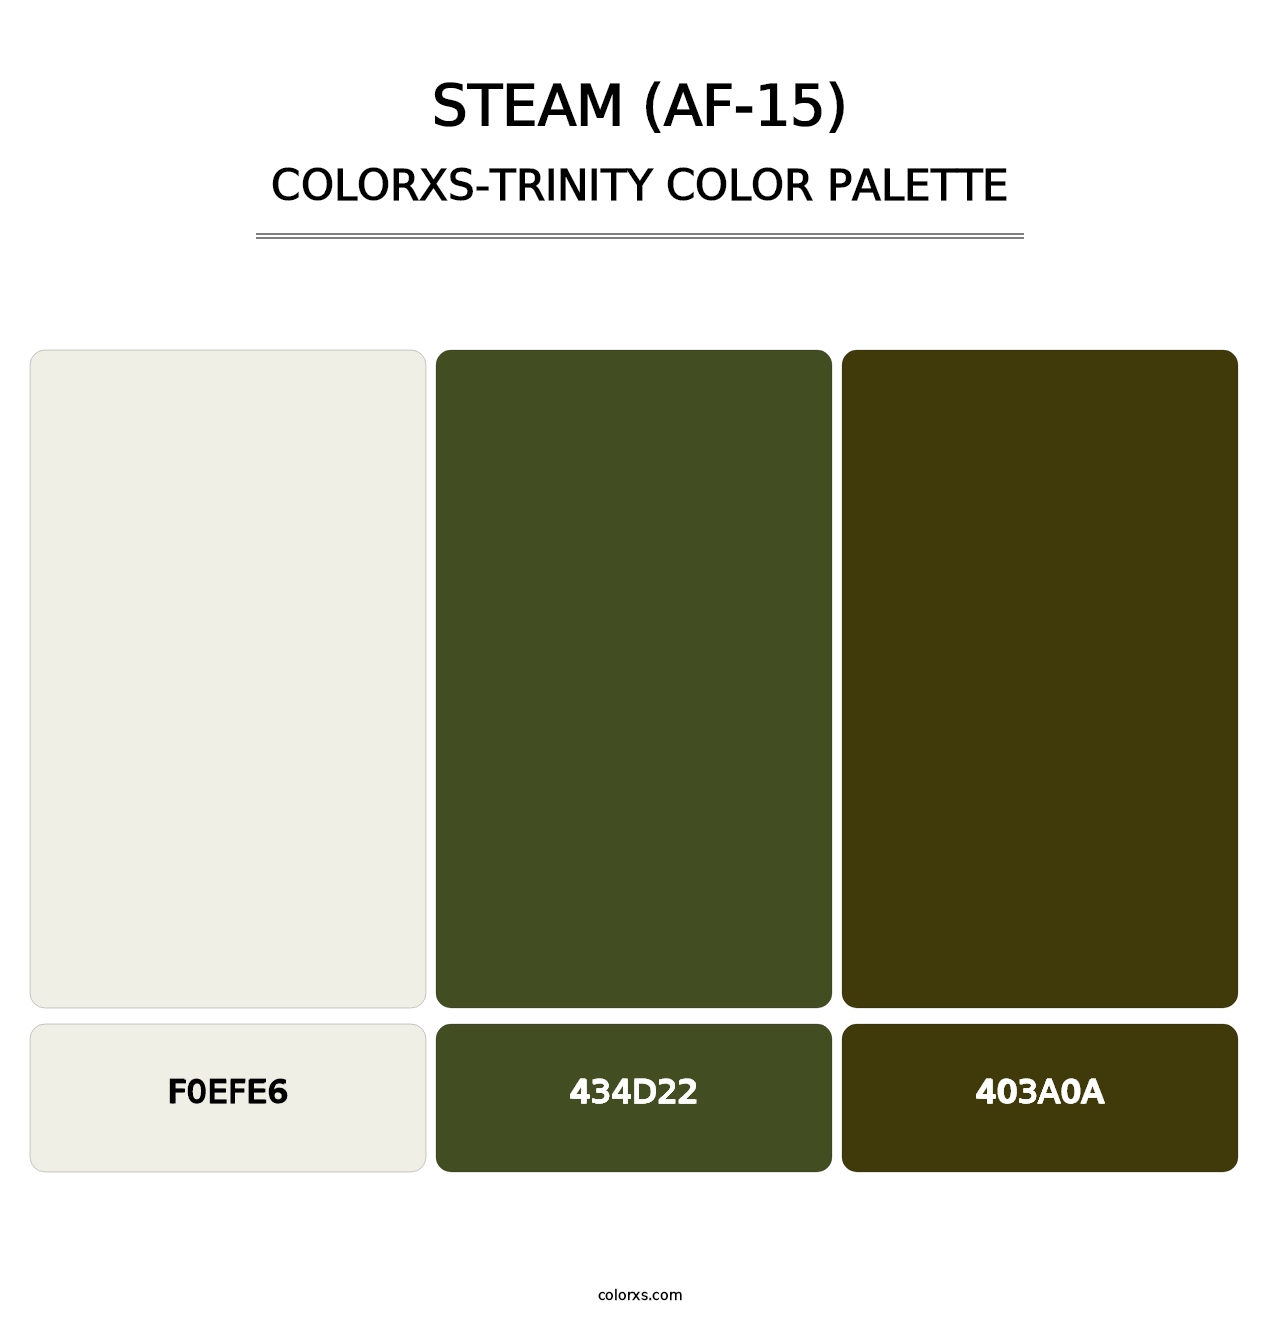 Steam (AF-15) - Colorxs Trinity Palette